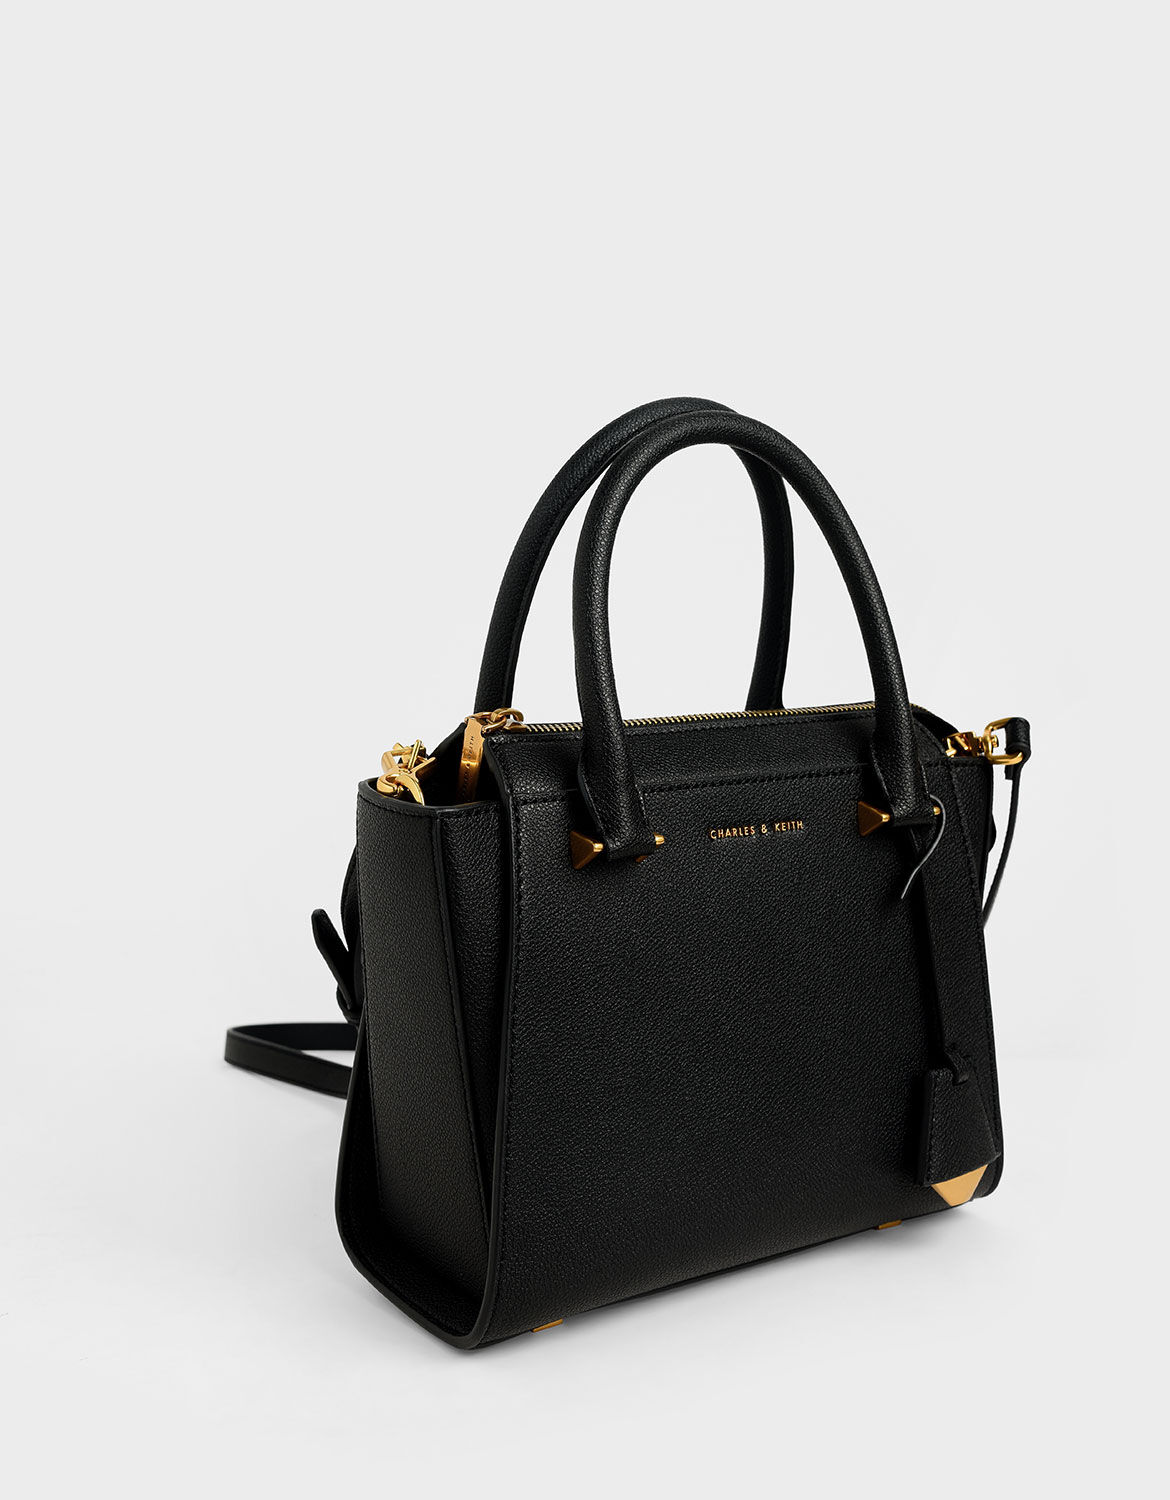 Charles & Keith Bag / To make cheerful and affordable styles that are ...